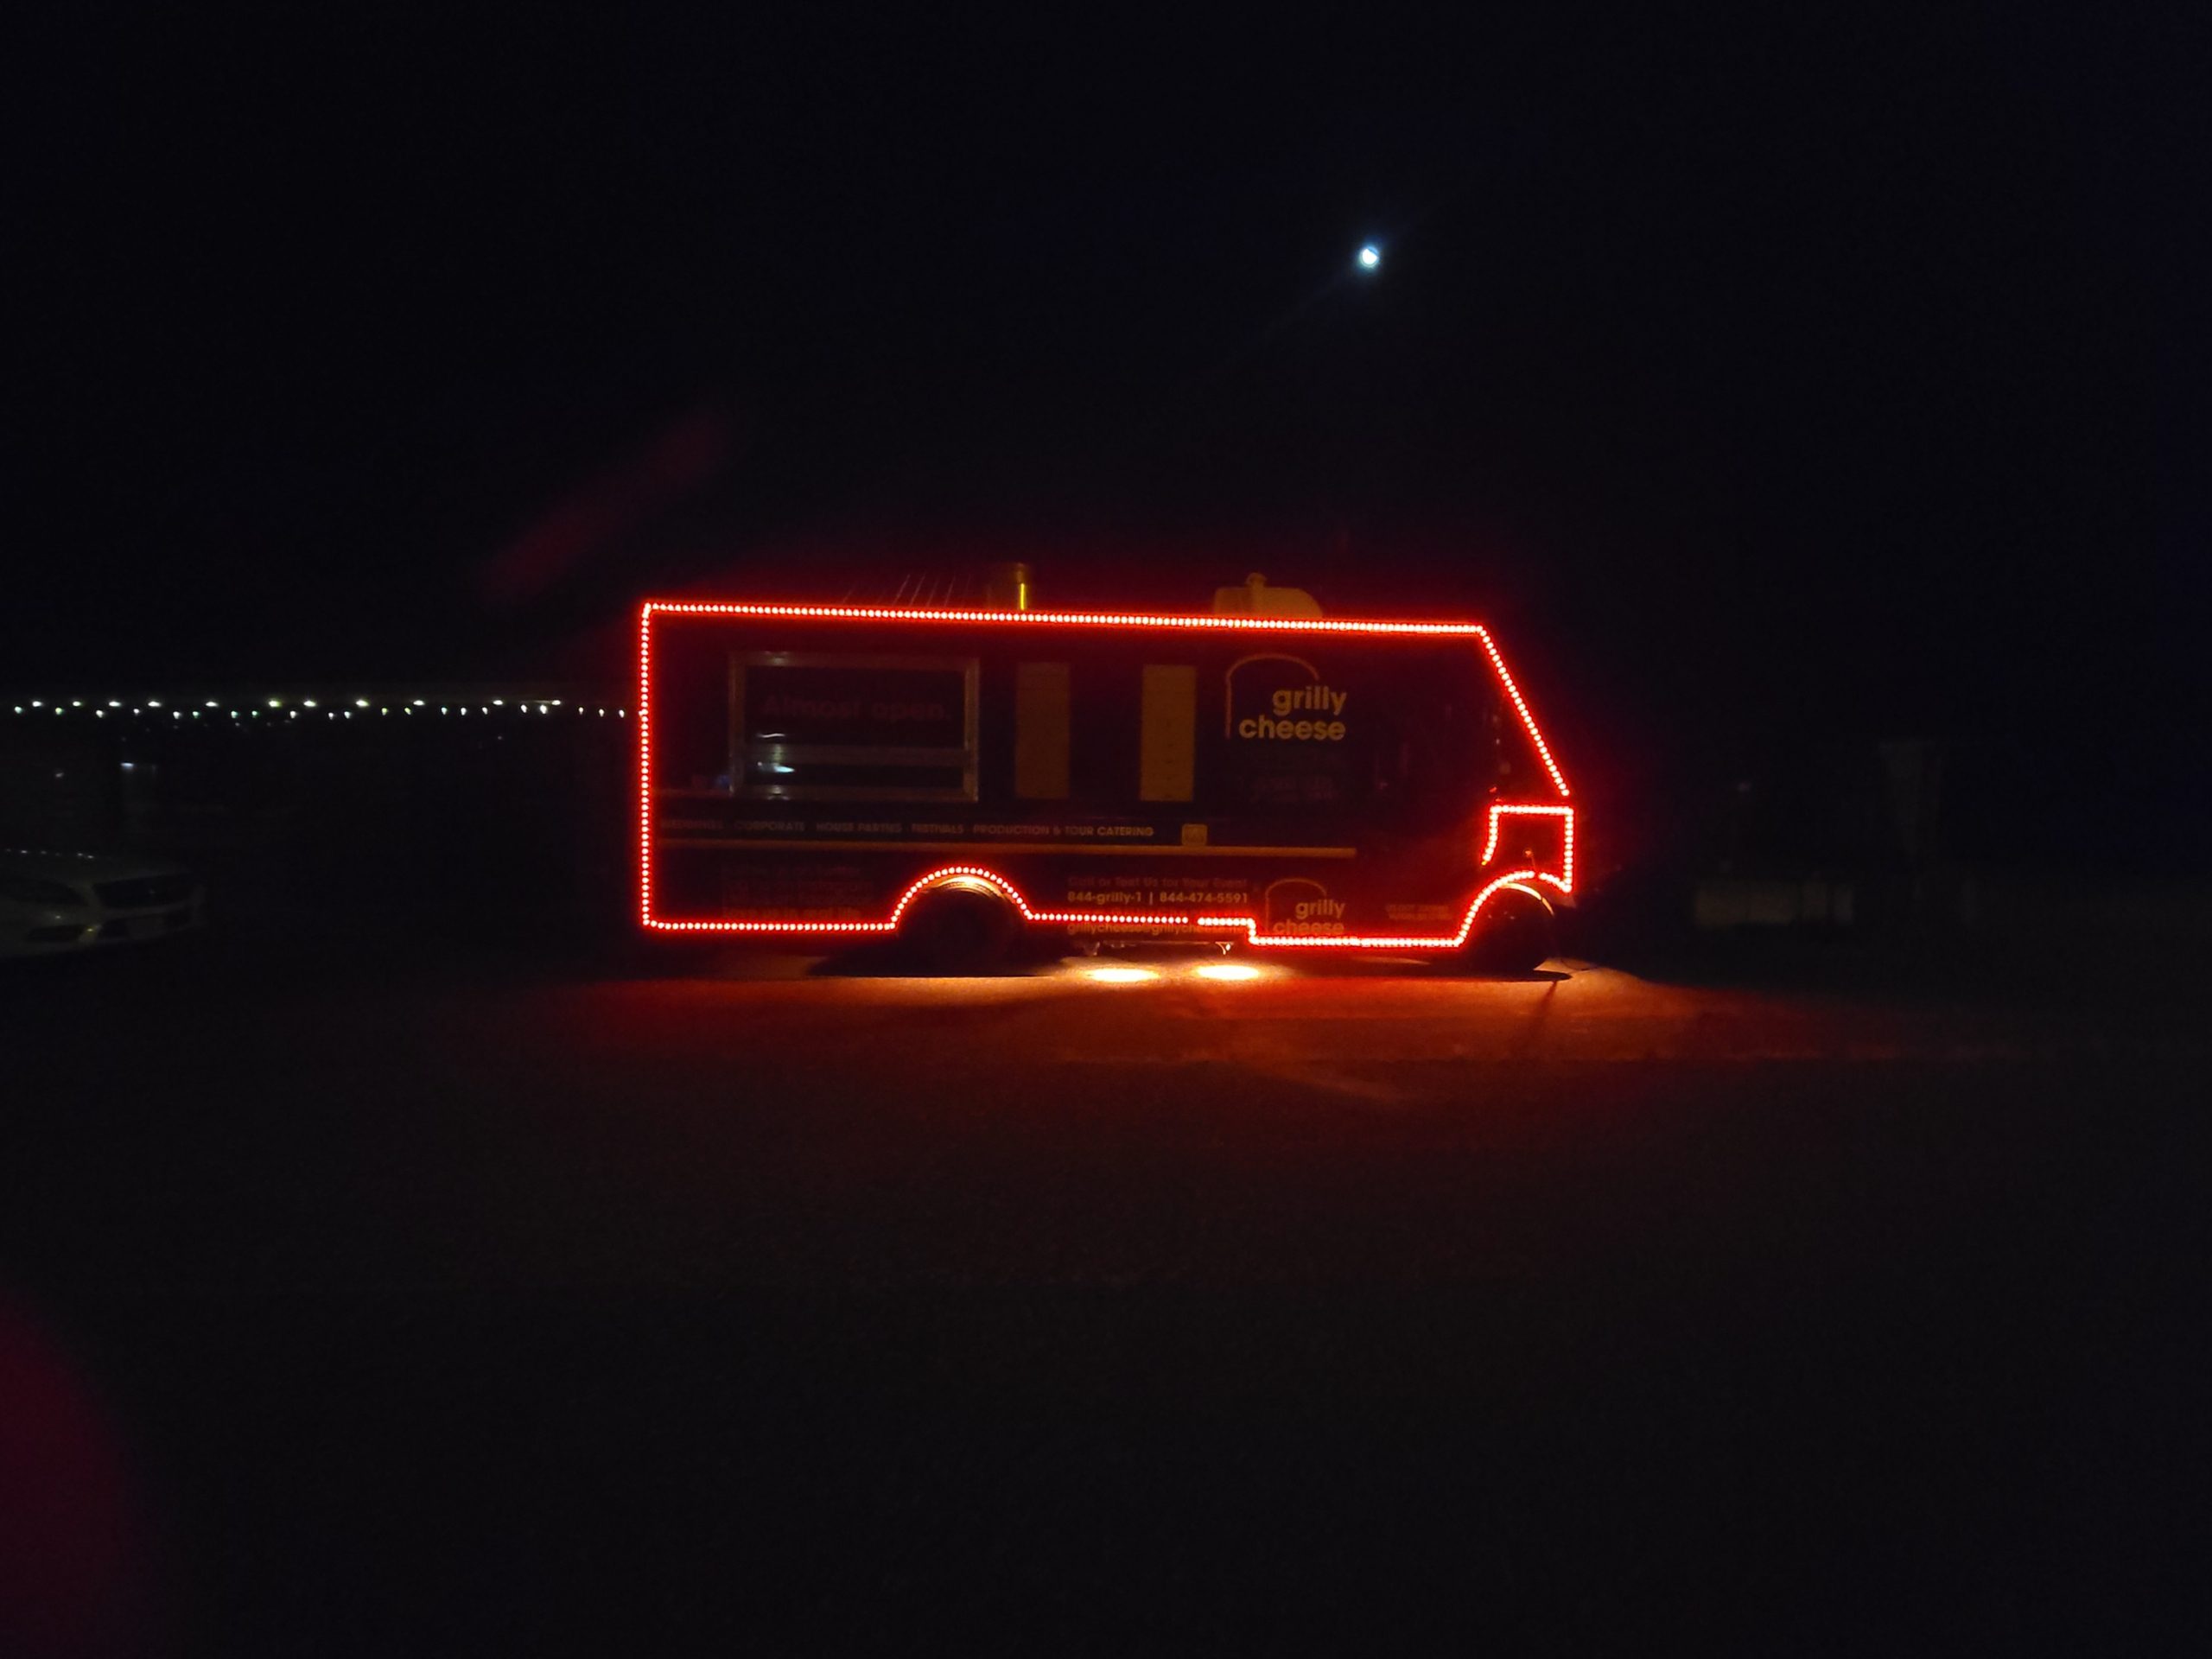 A food truck at nighttime with led lighting strips on the outside of the truck